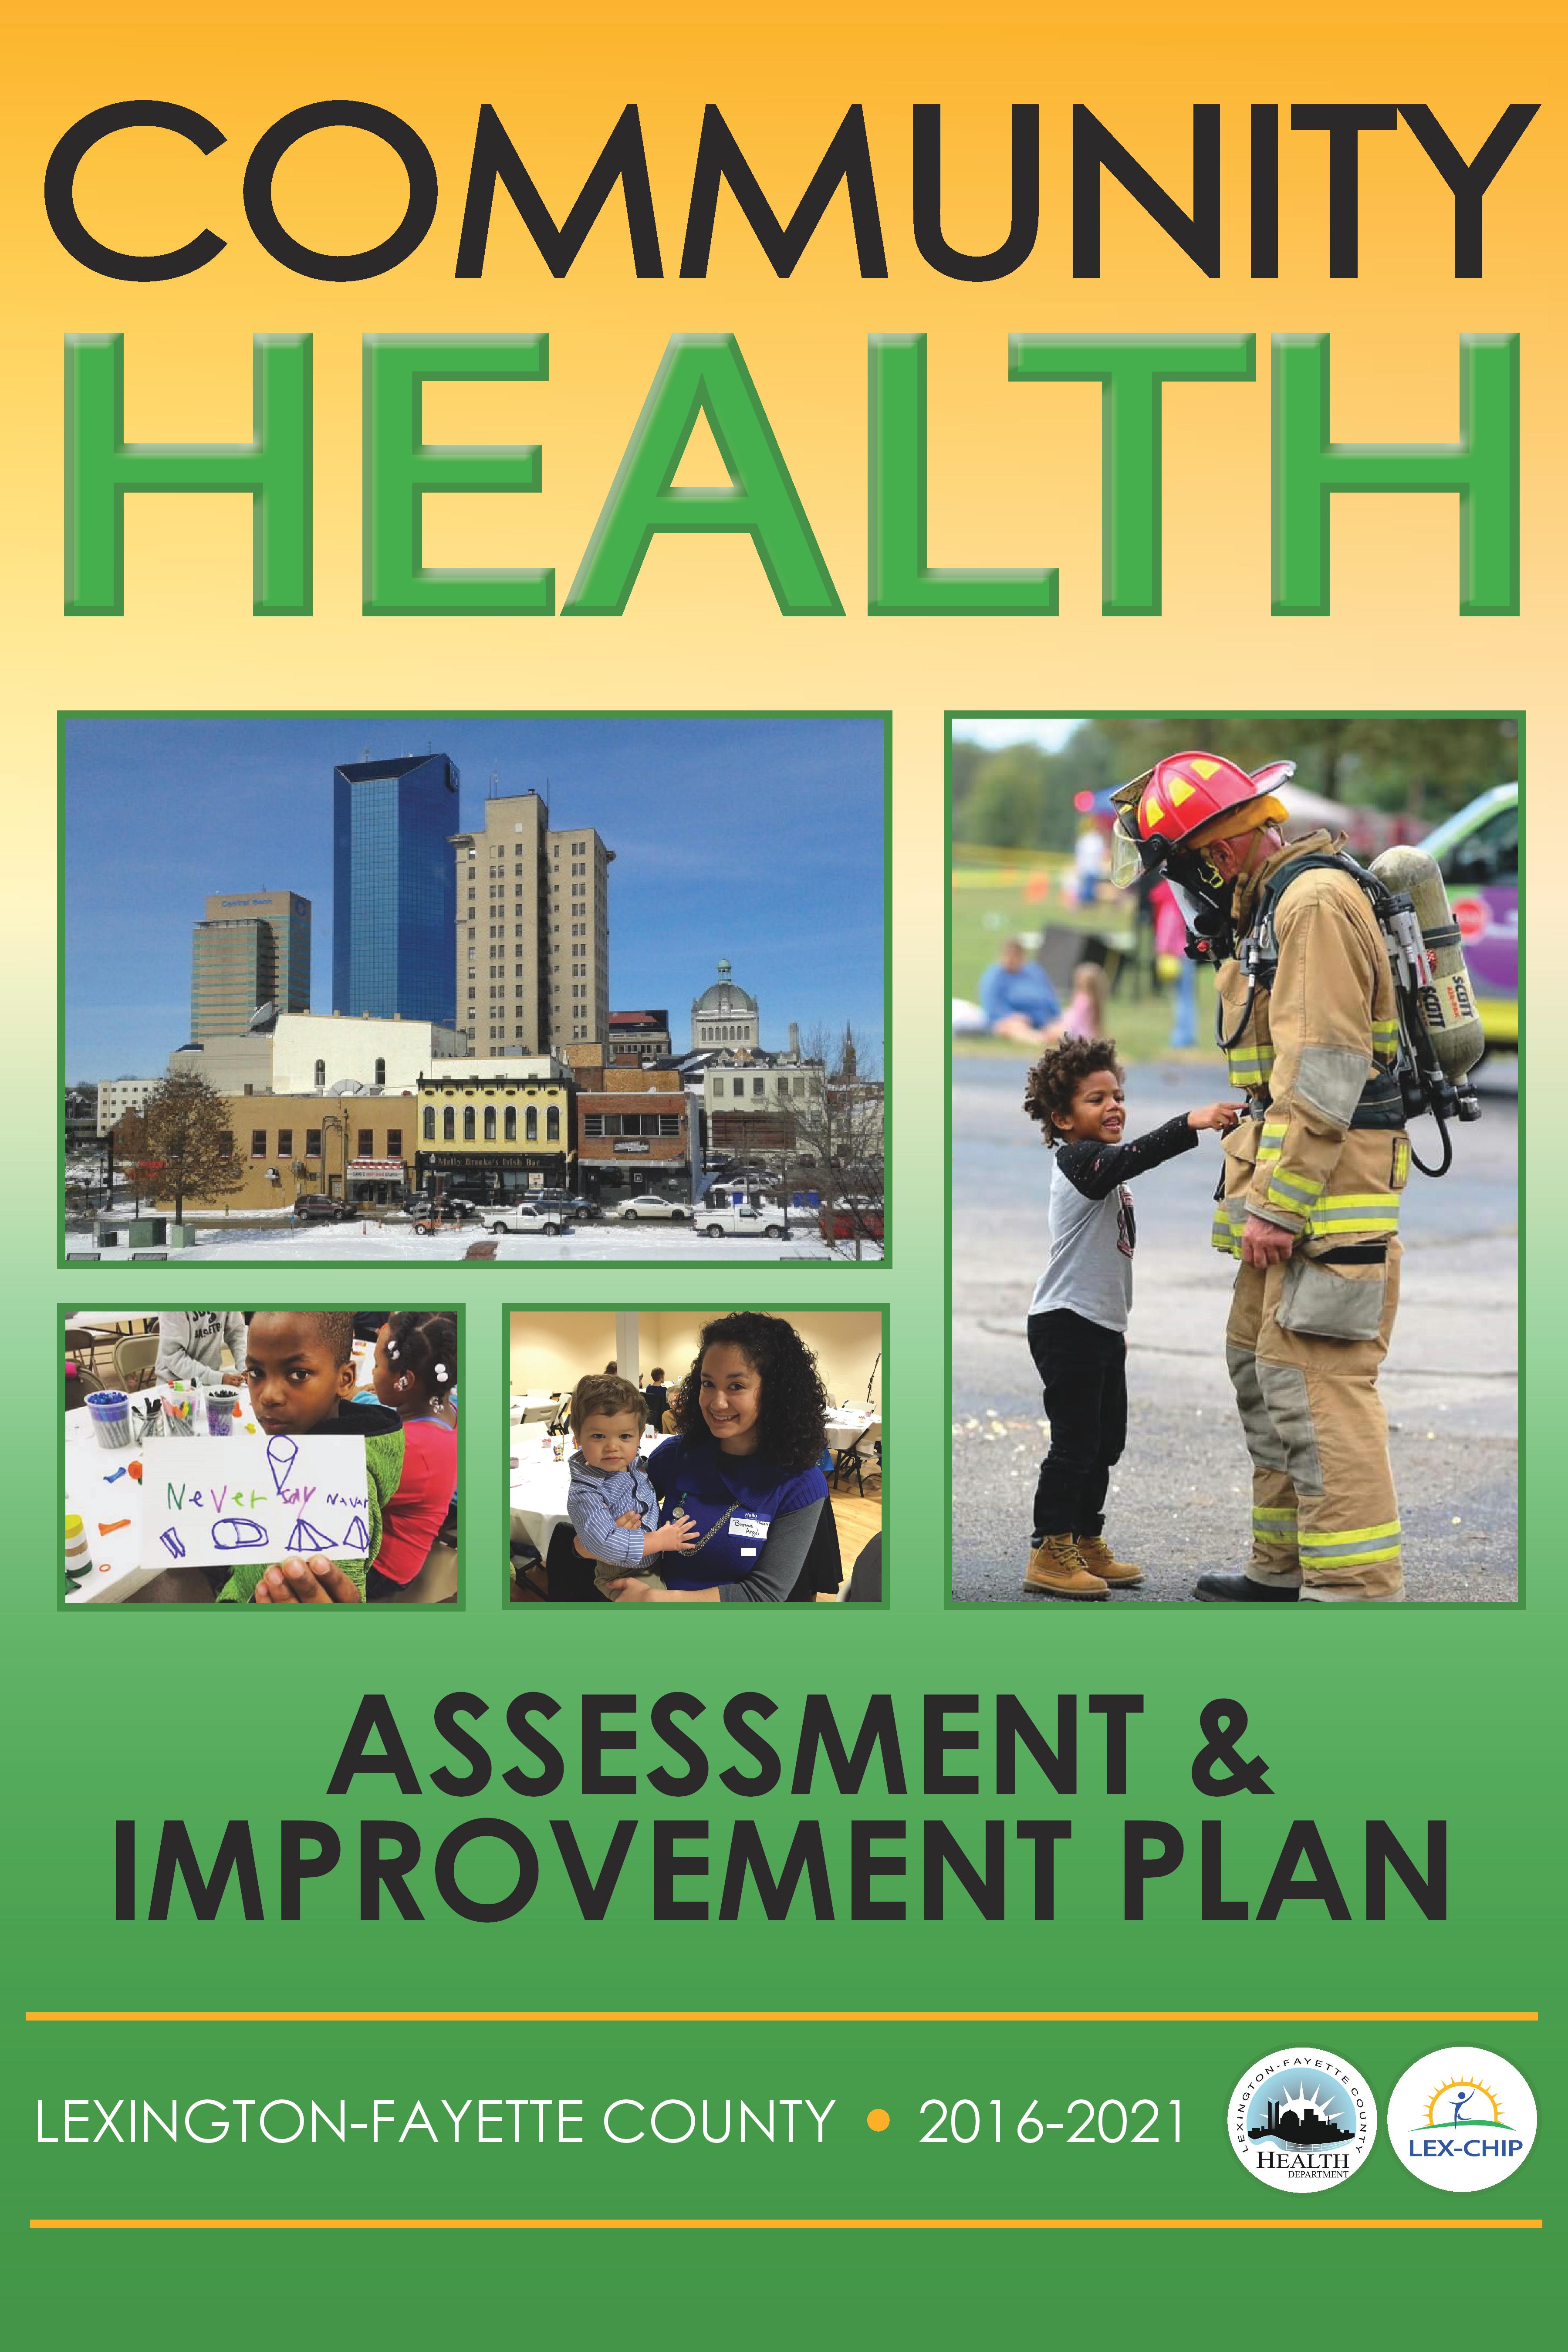 LFCHD, community partners reveal city’s health assessment and improvement plan